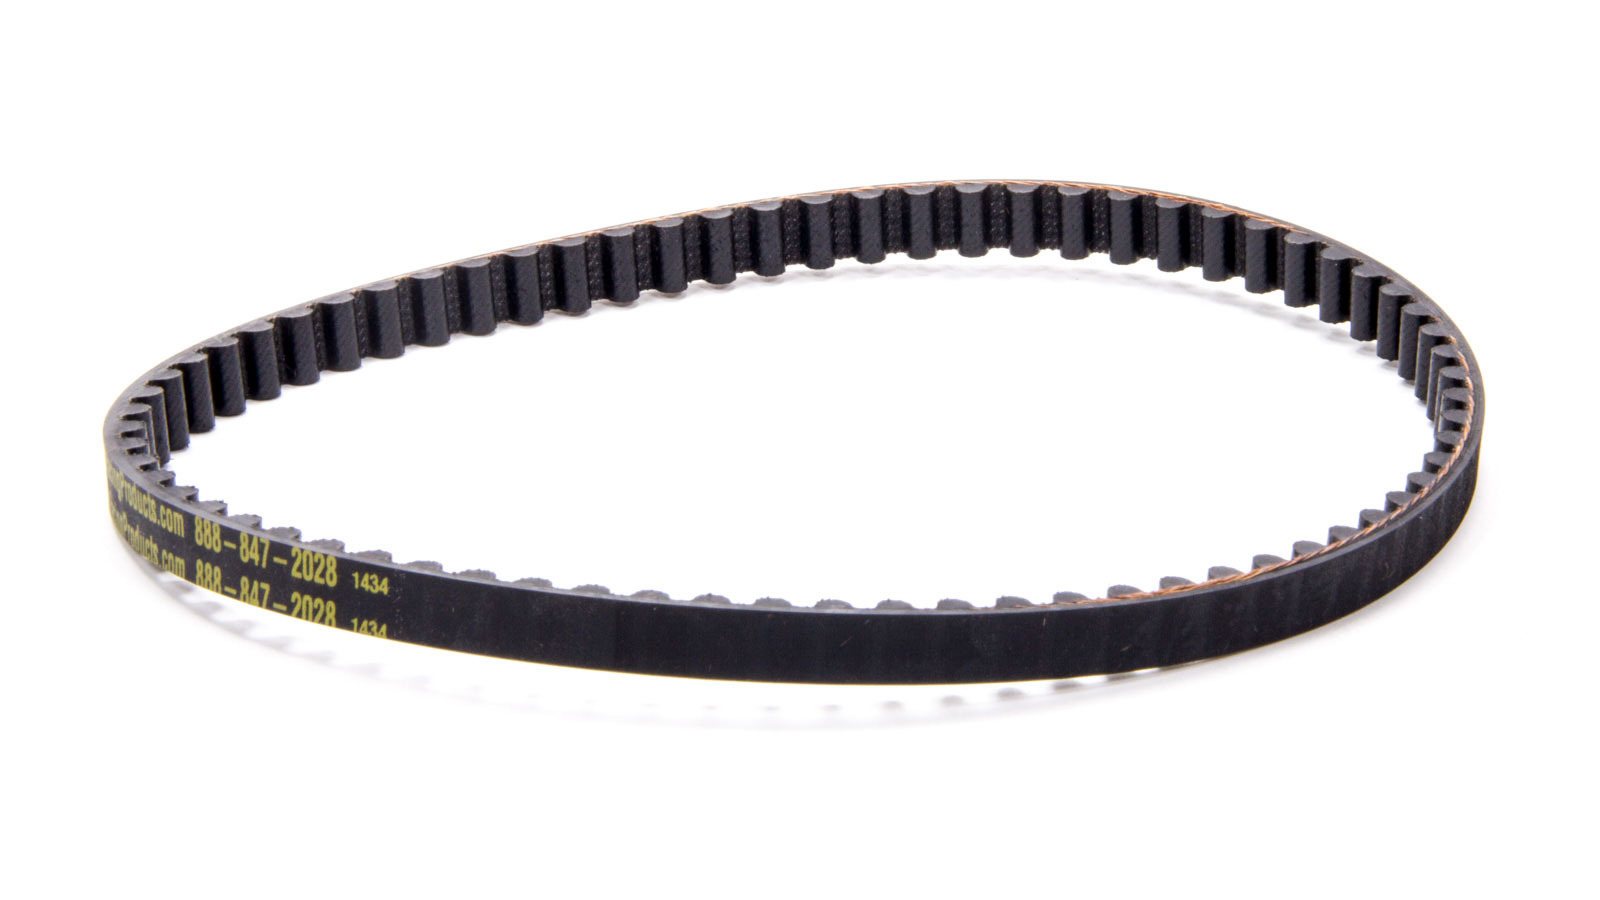 Jones Racing Products 672-10HD HTD Drive Belt, 26.460 in Long, 10 mm Wide, 8 mm Pitch, Each